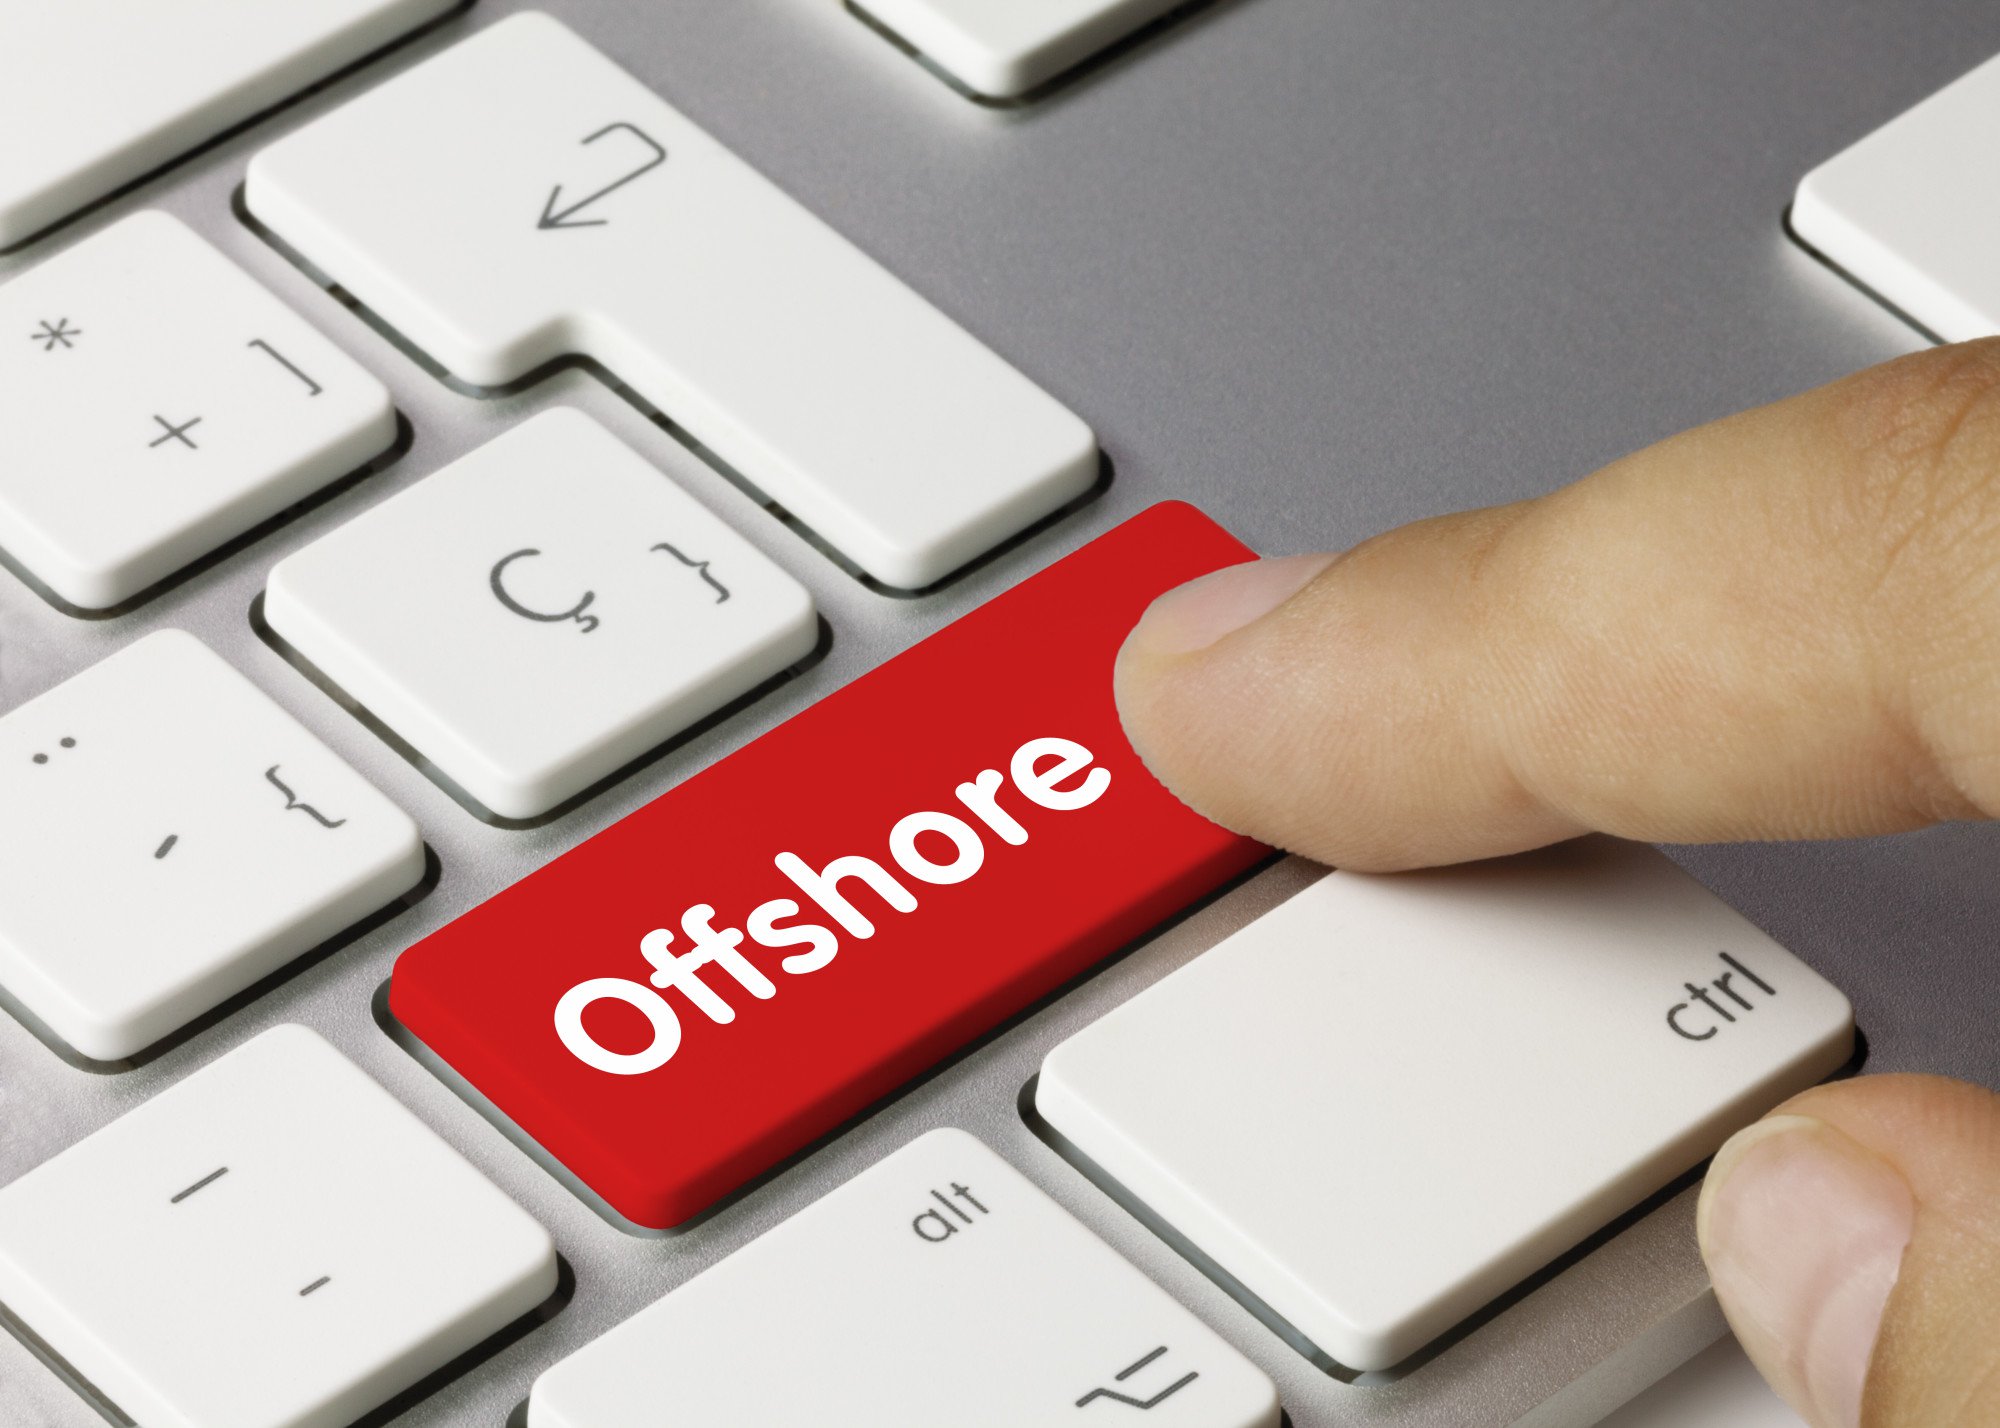 offshore asset protection trust